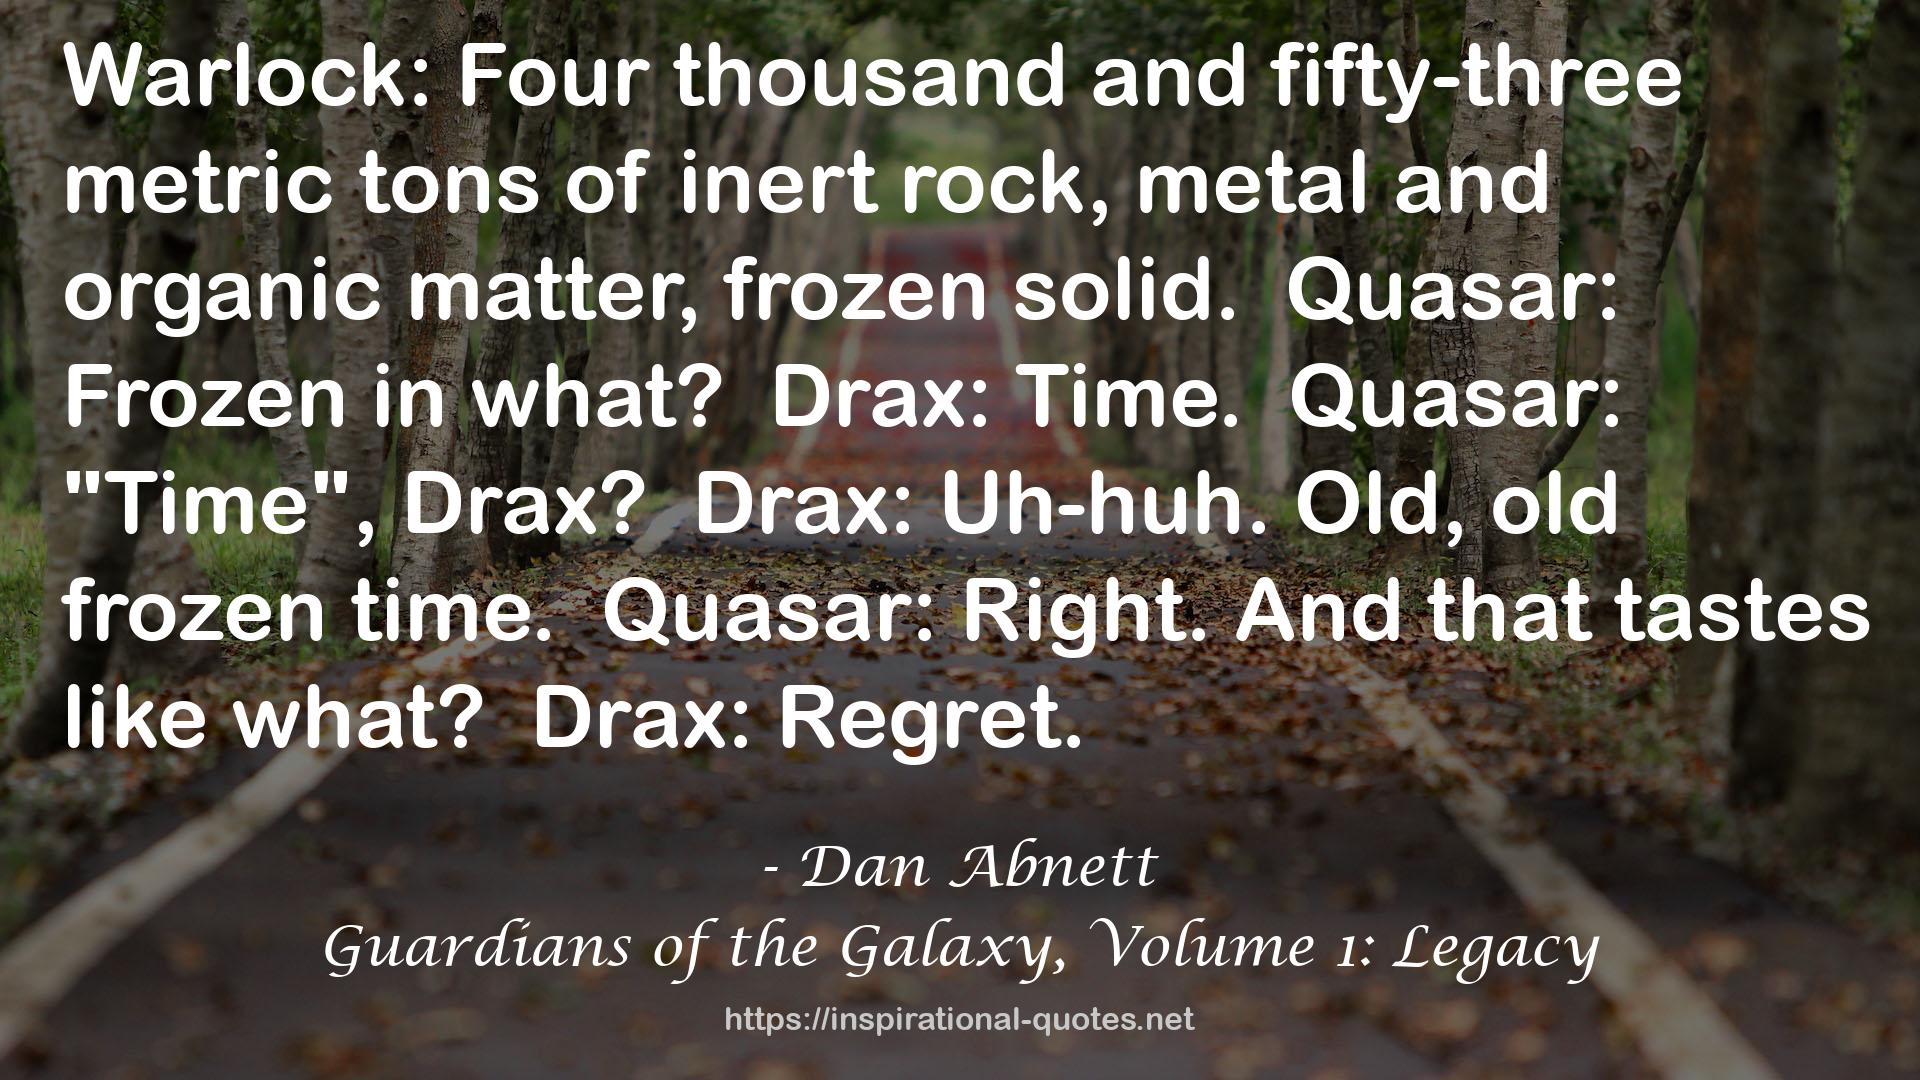 Guardians of the Galaxy, Volume 1: Legacy QUOTES